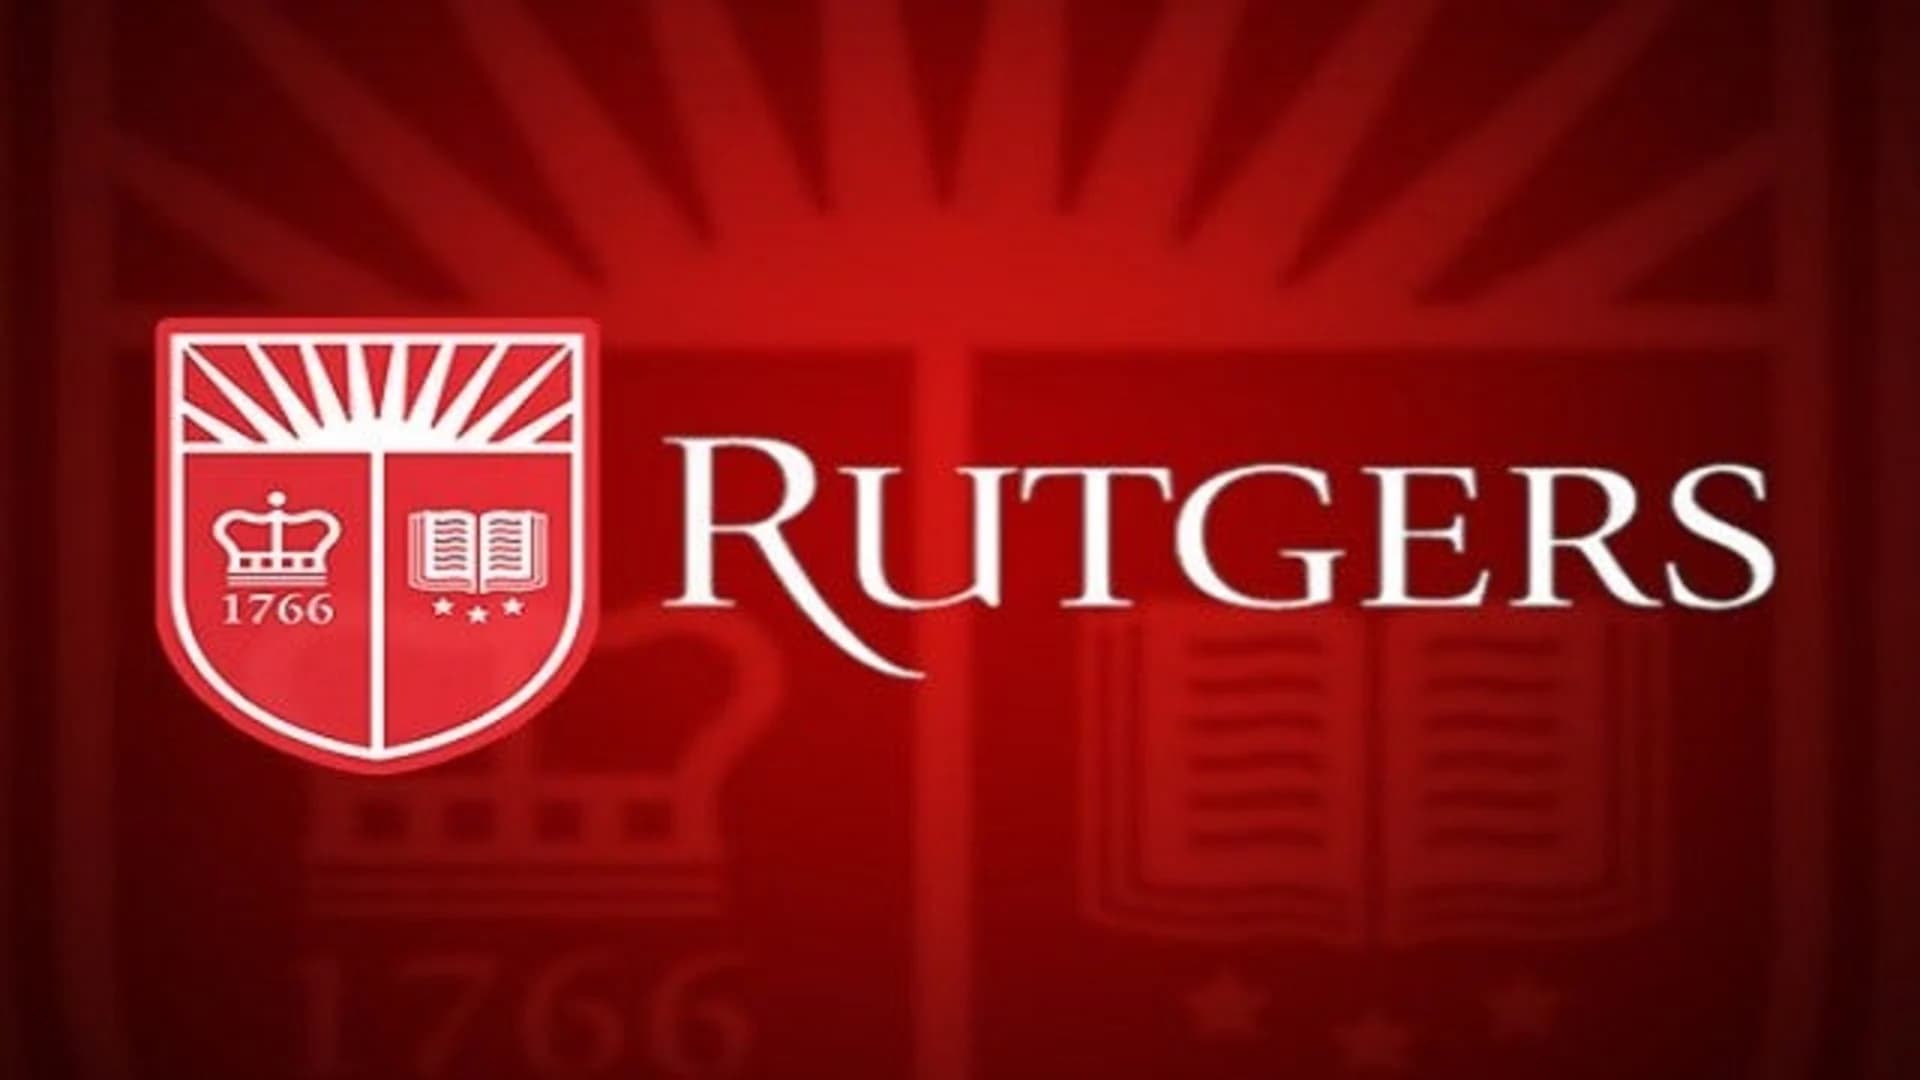 Rutgers swimming coach fired amid emotional abuse claims